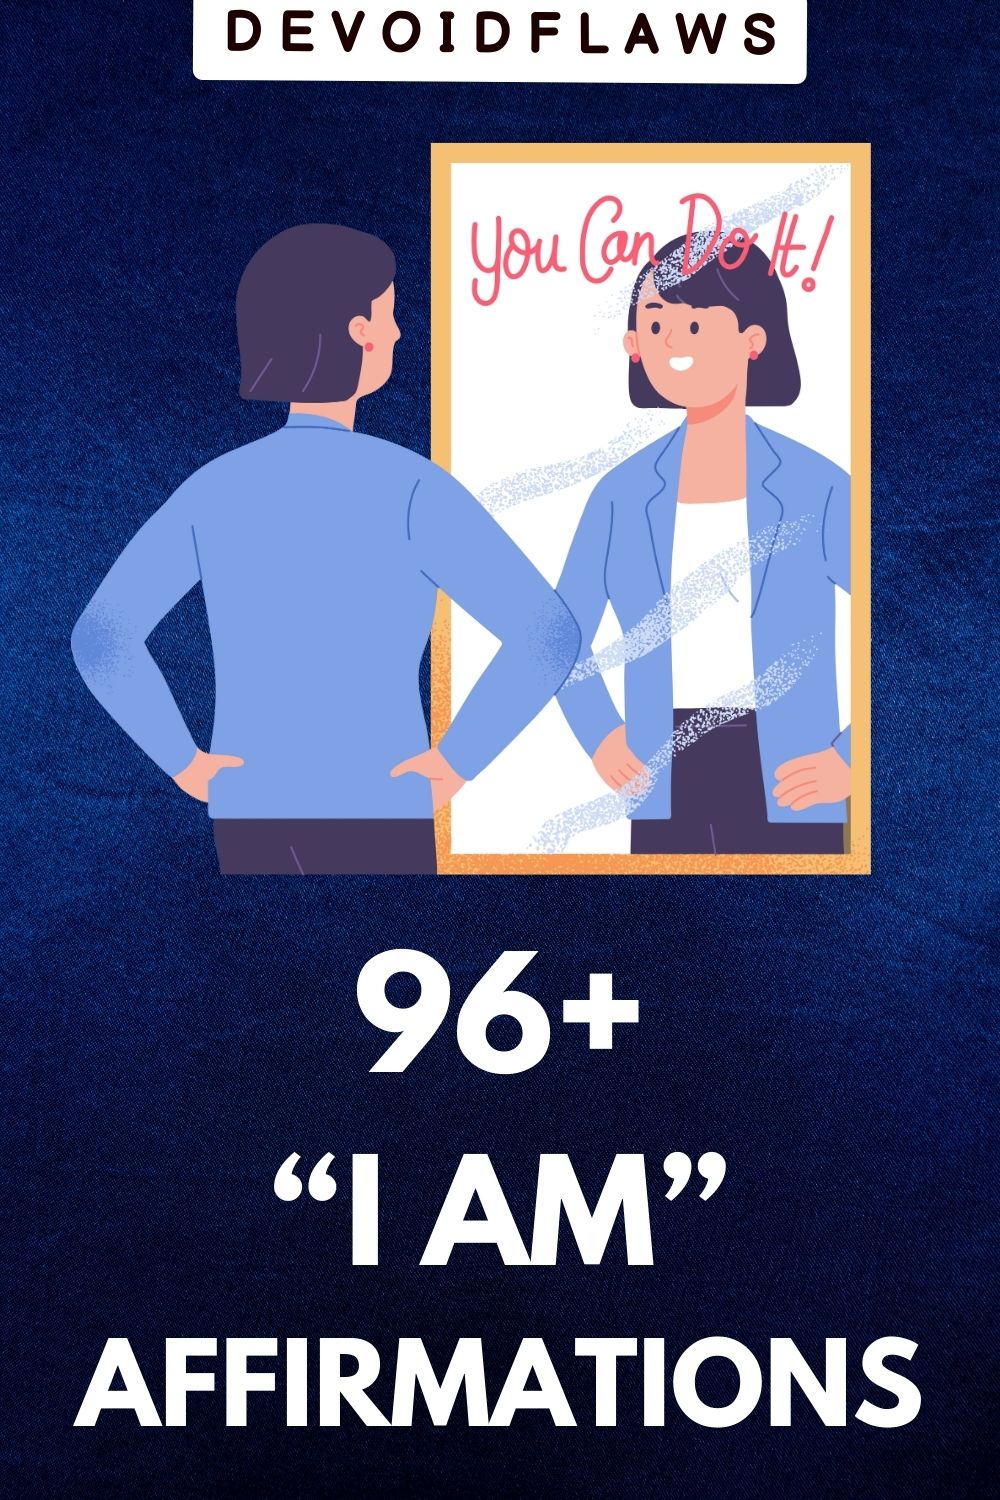 blue text image with text - 80+ "i am" affirmations